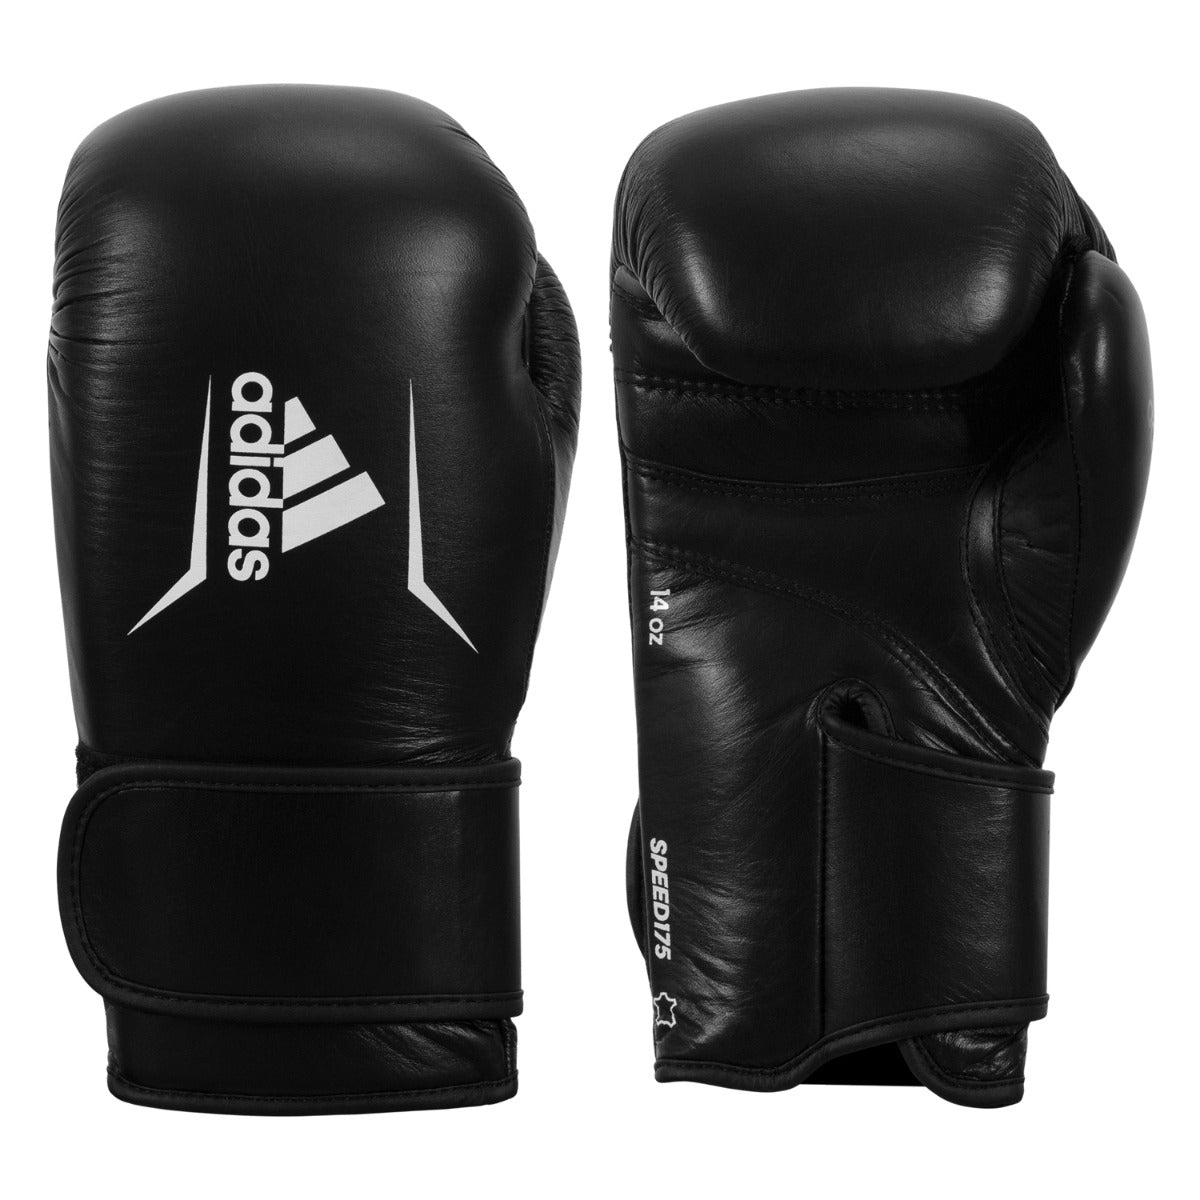 Zonsverduistering Scheur Nu adidas Speed 175 Leather Training Gloves | TITLE Boxing Gear